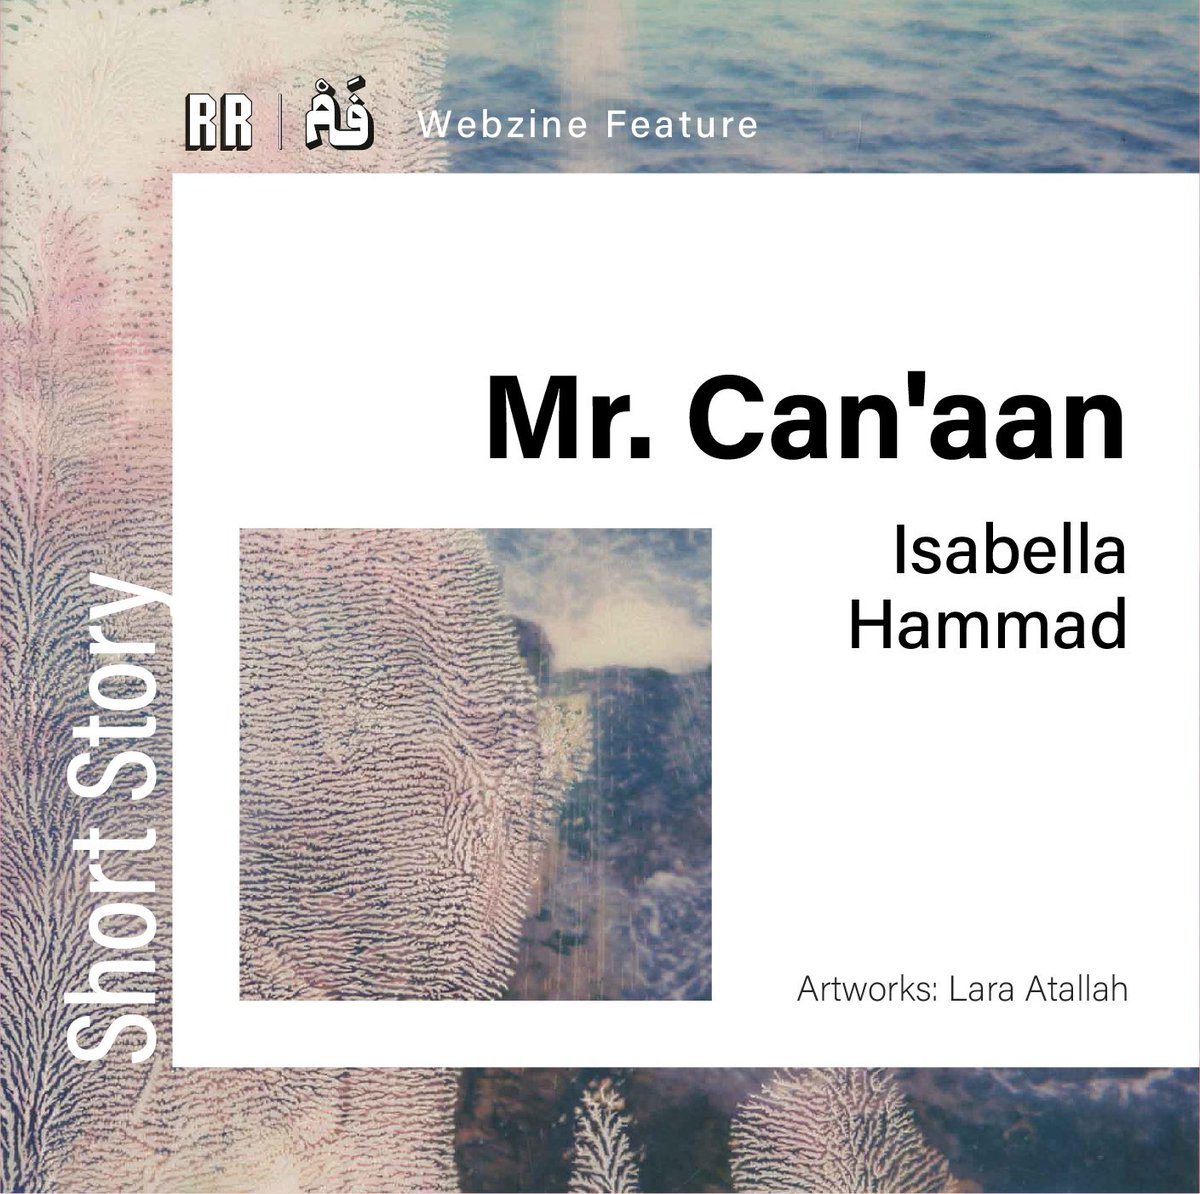 In the short story 'Mr. Can'aan' by Isabella Hammad, the characters chase down history, far from where it happened, in Palestine, and bring closure to their pasts with distant narrators

Artwork by Lara Atallah

#isabellahammad #mrcanaan #rustedradishes 

rustedradishes.com/mr-canaan/